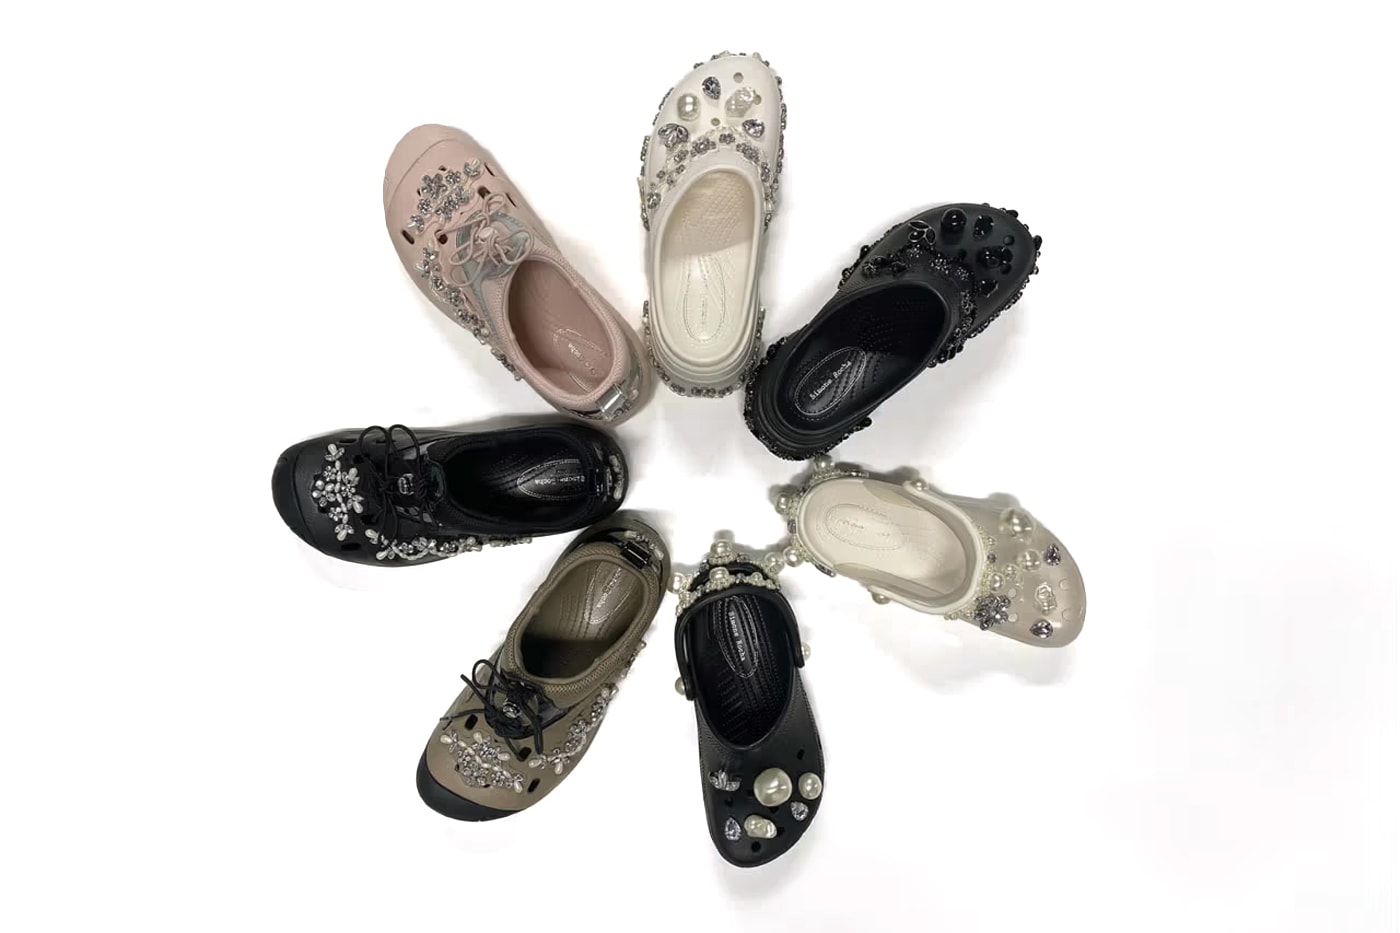 Simone Rocha Joins the Crocs Fun With New Collaboration Footwear